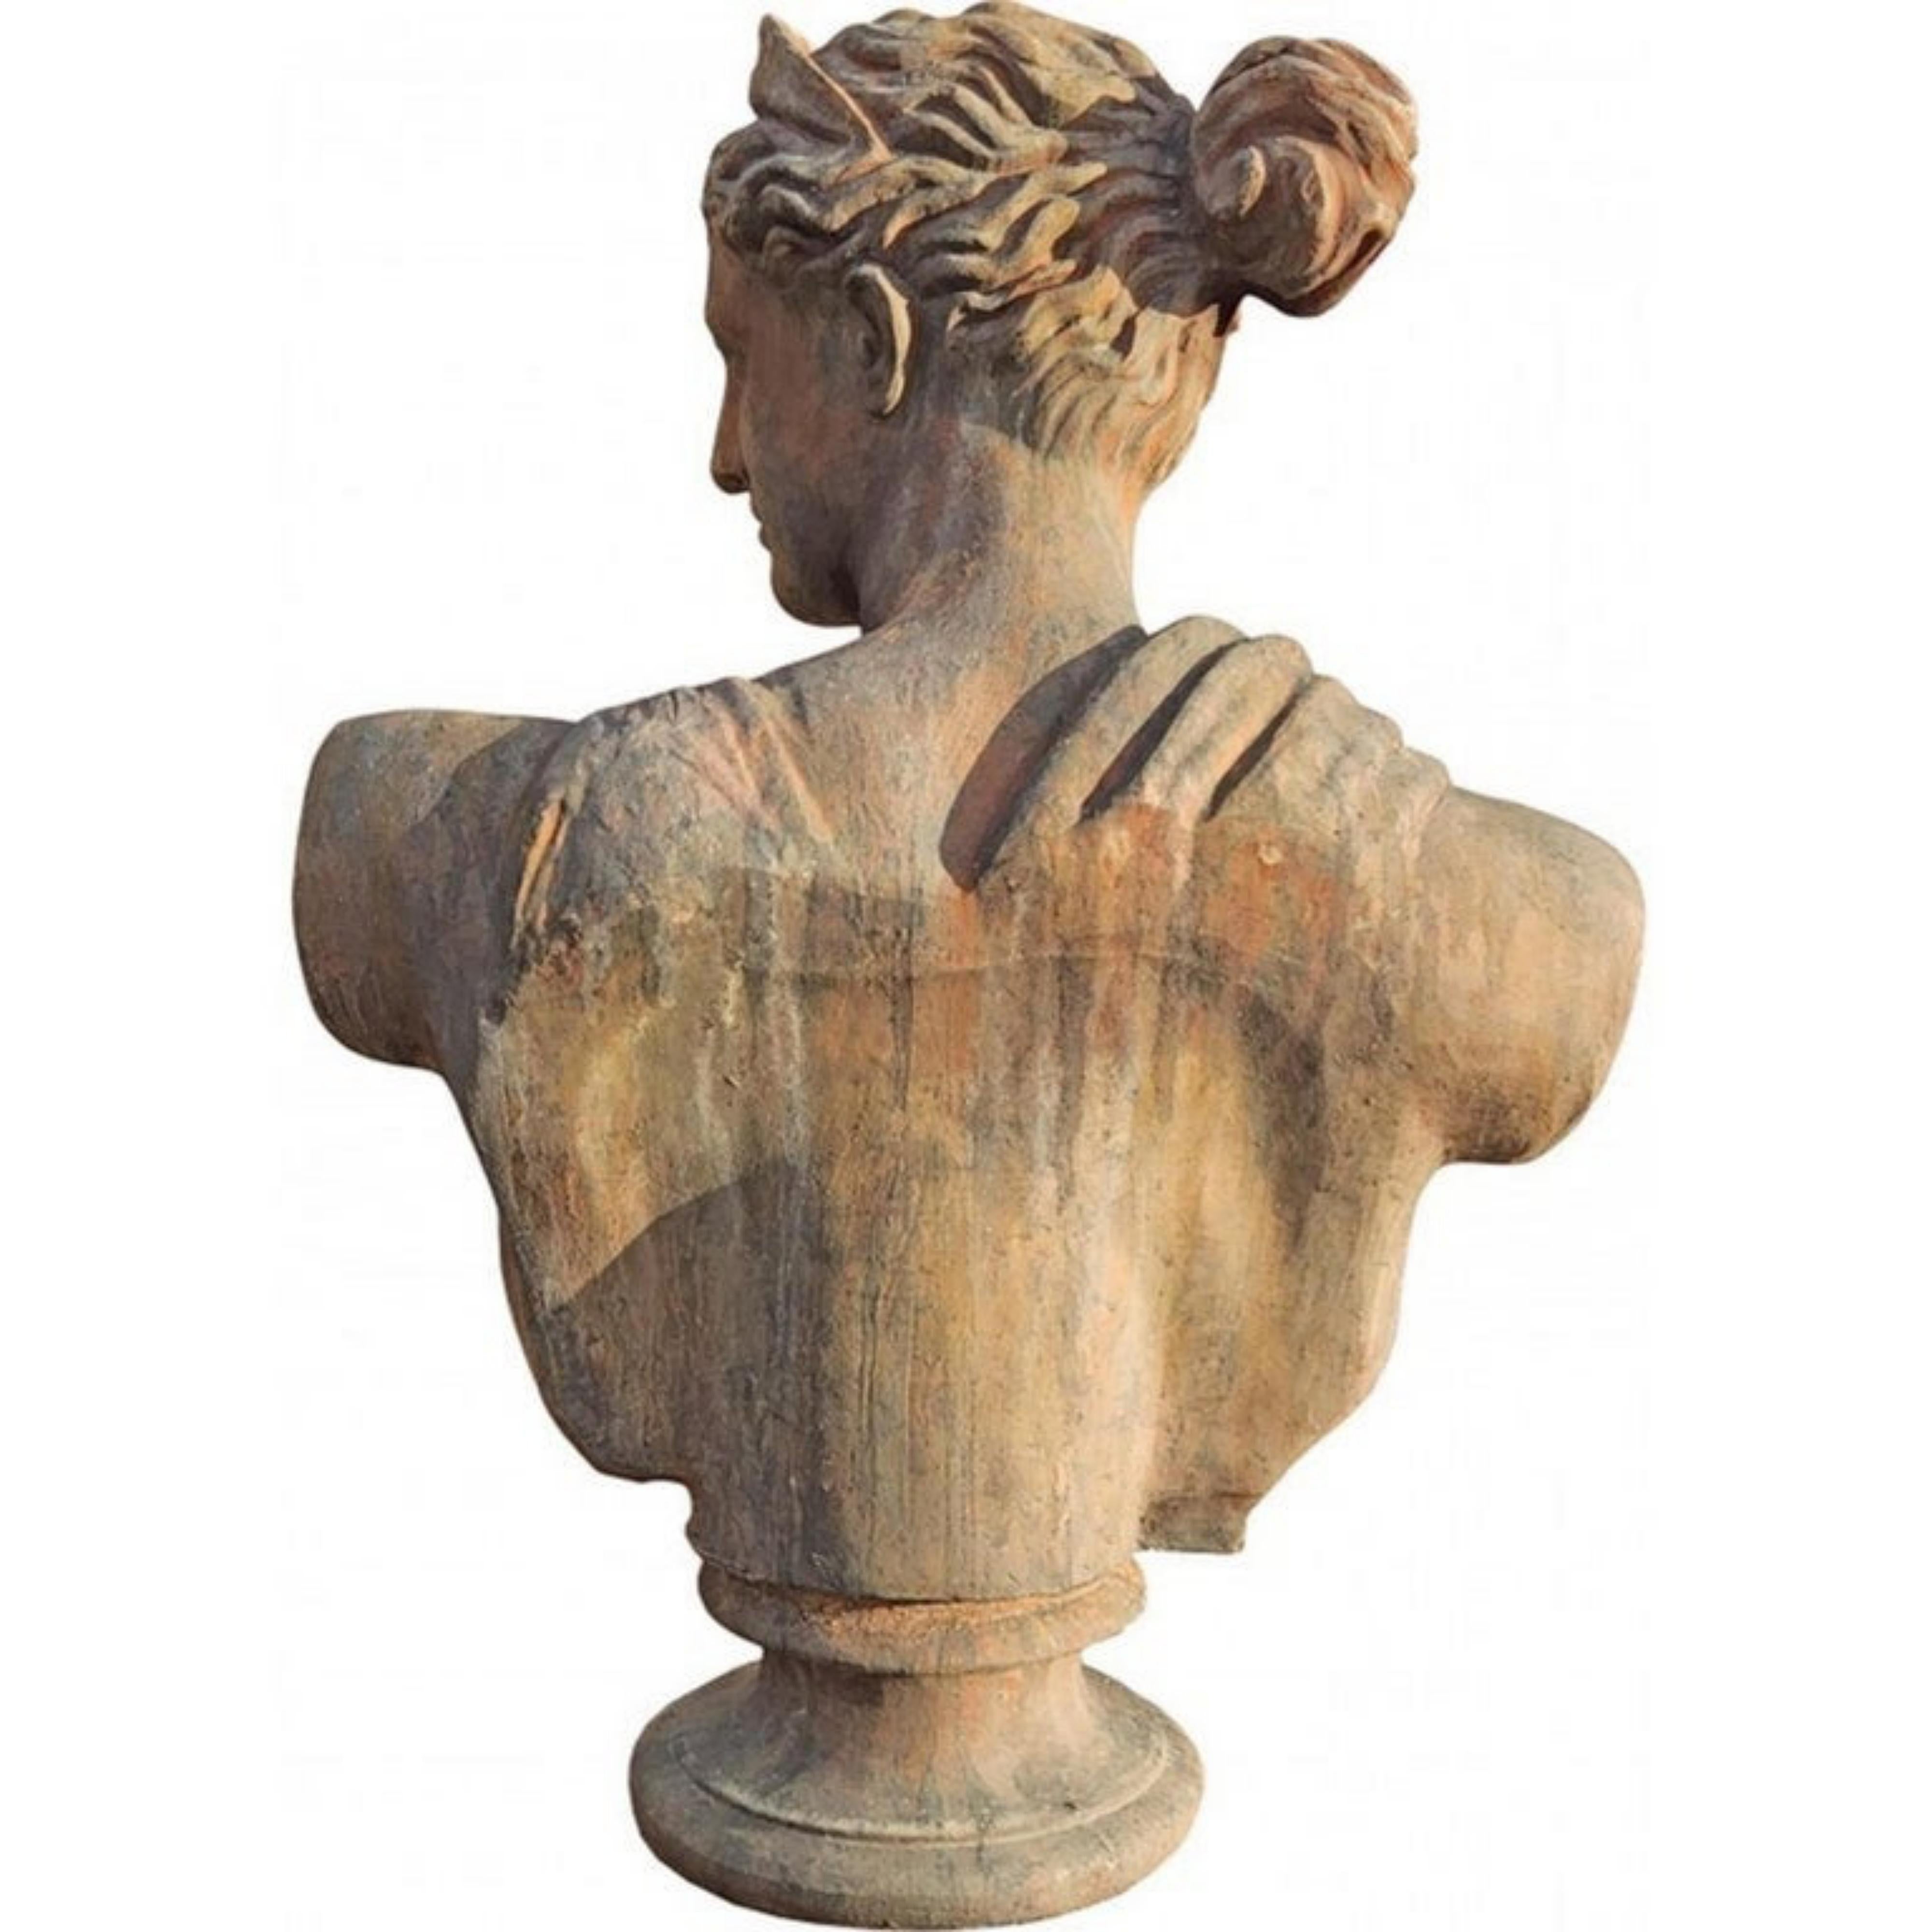 Diana Bust in Terracotta - Artemis of Versailles early 20th century.

Roman goddess of hunting.
Copy of the Roman statue of the Louvre 